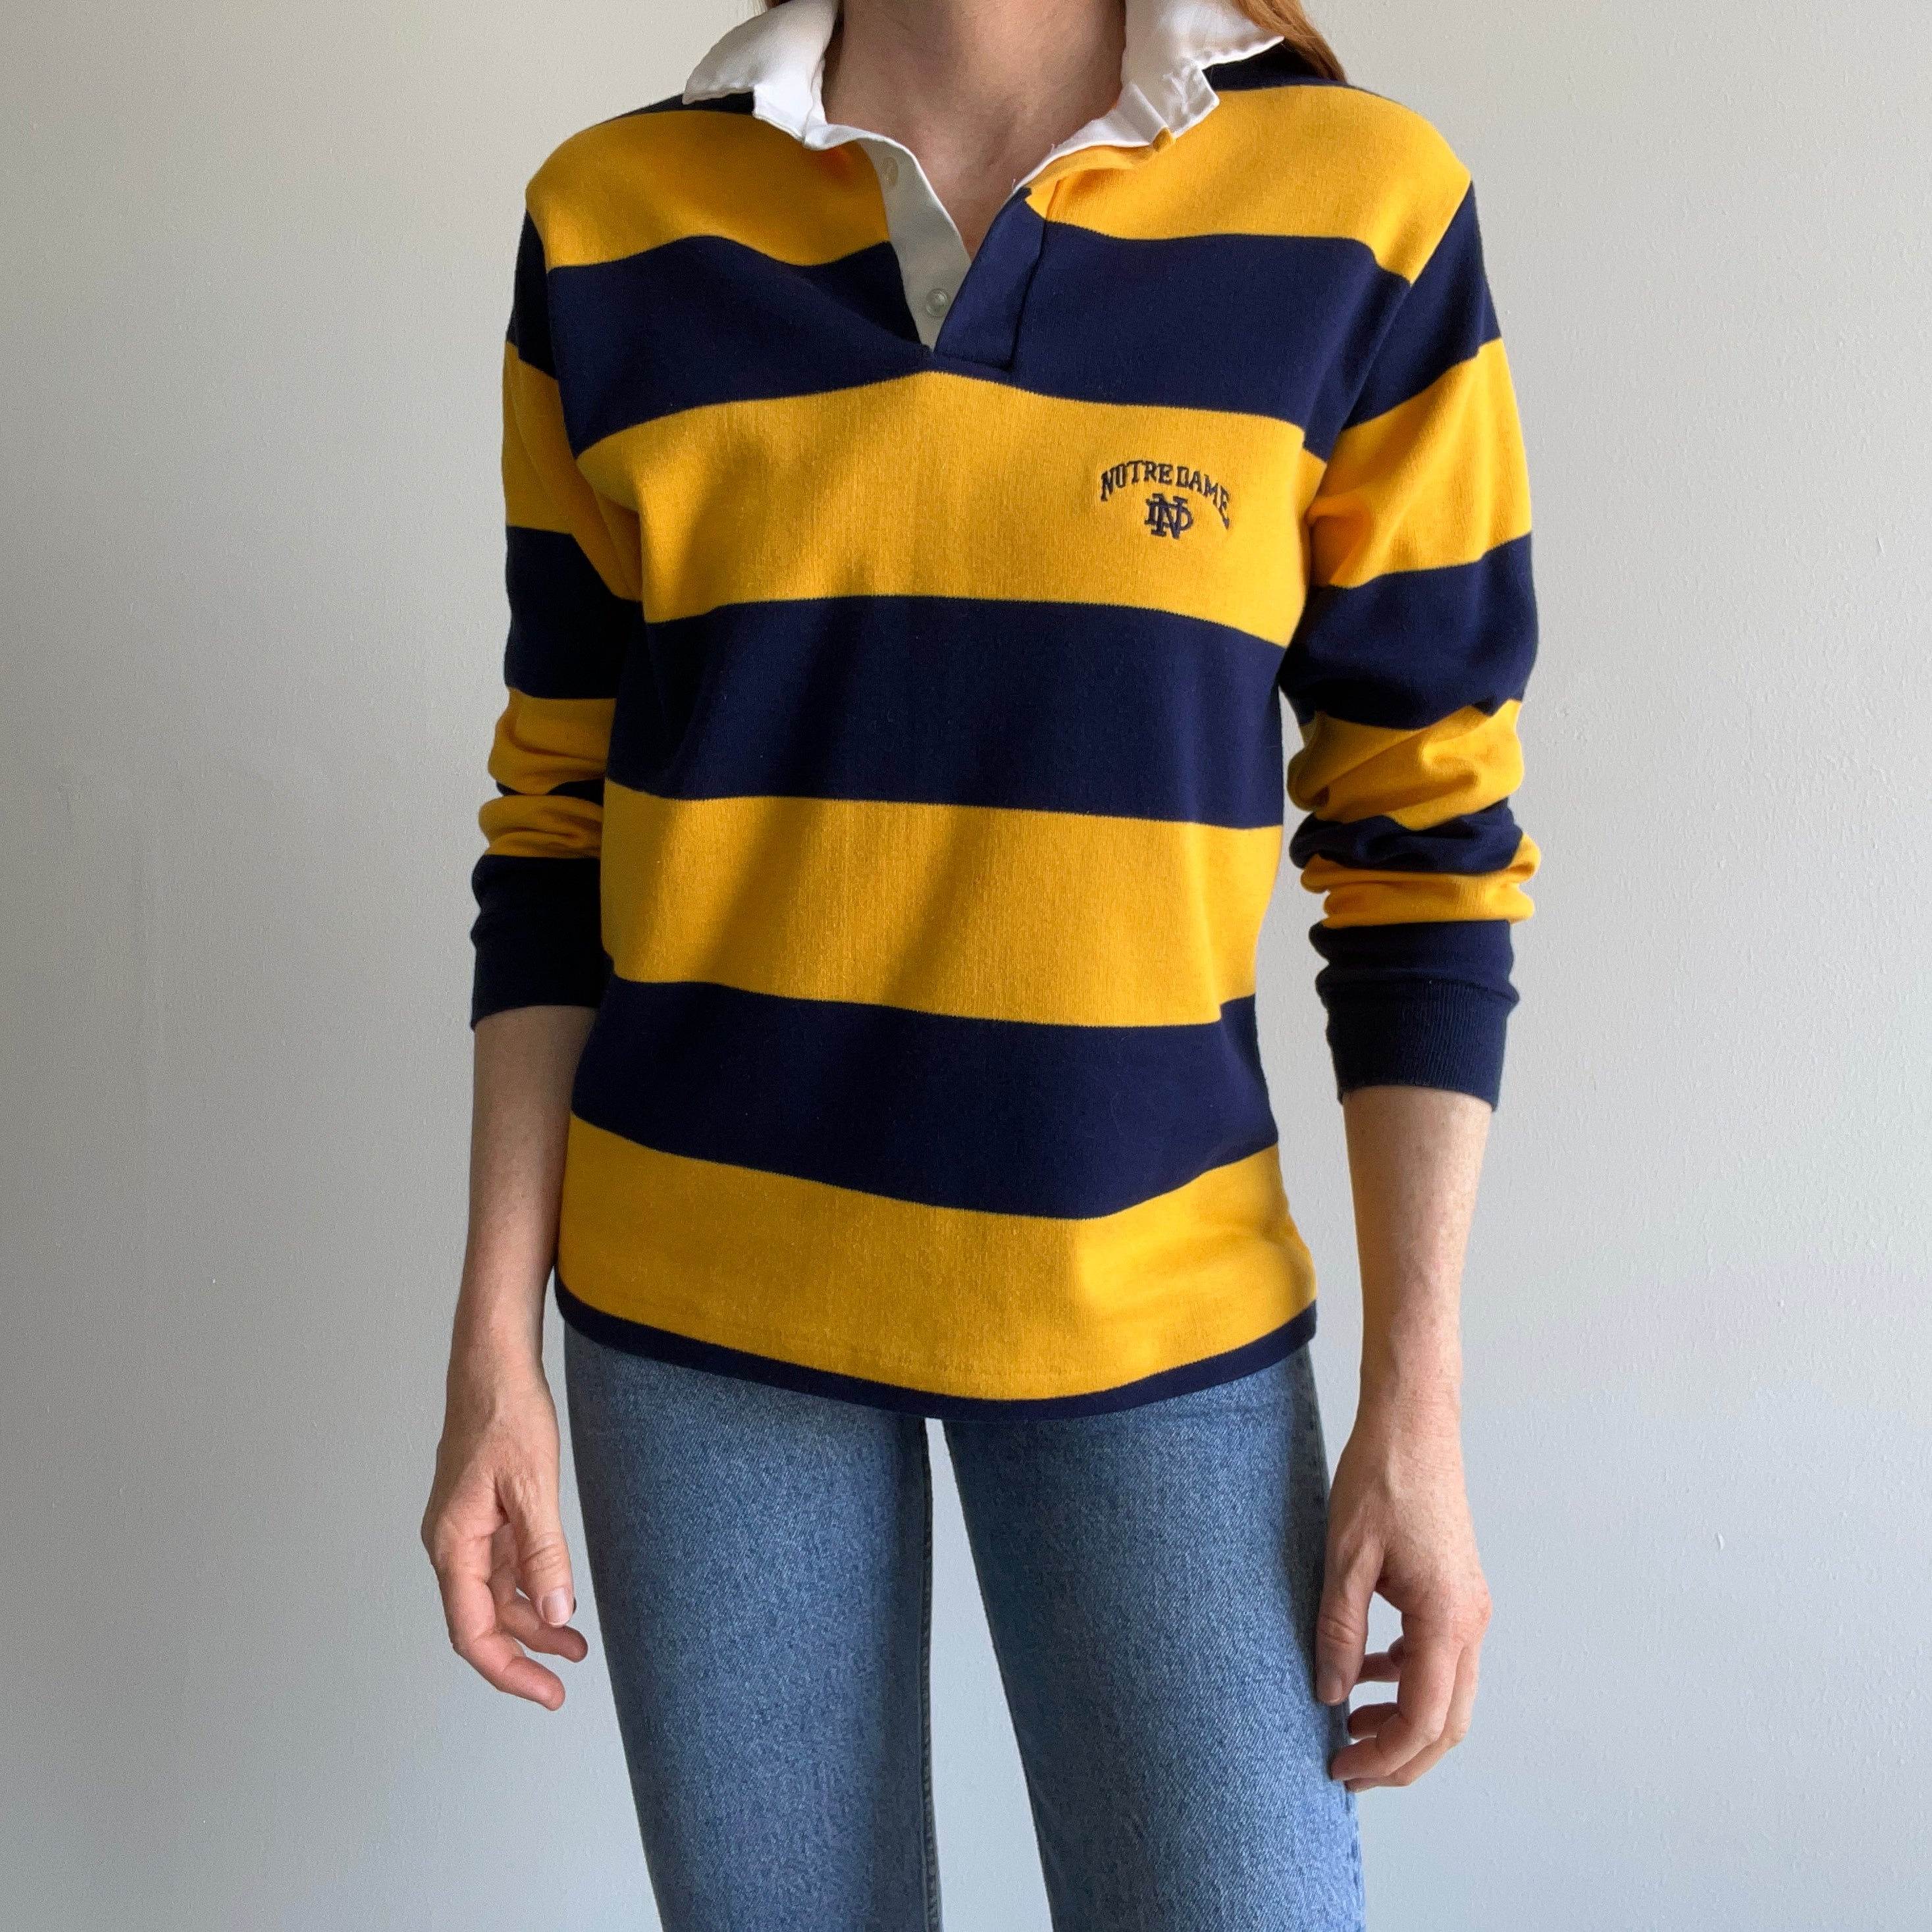 1980/90s Notre Dame Striped Super Soft (Like, Seriously) Rugby Style Shirt